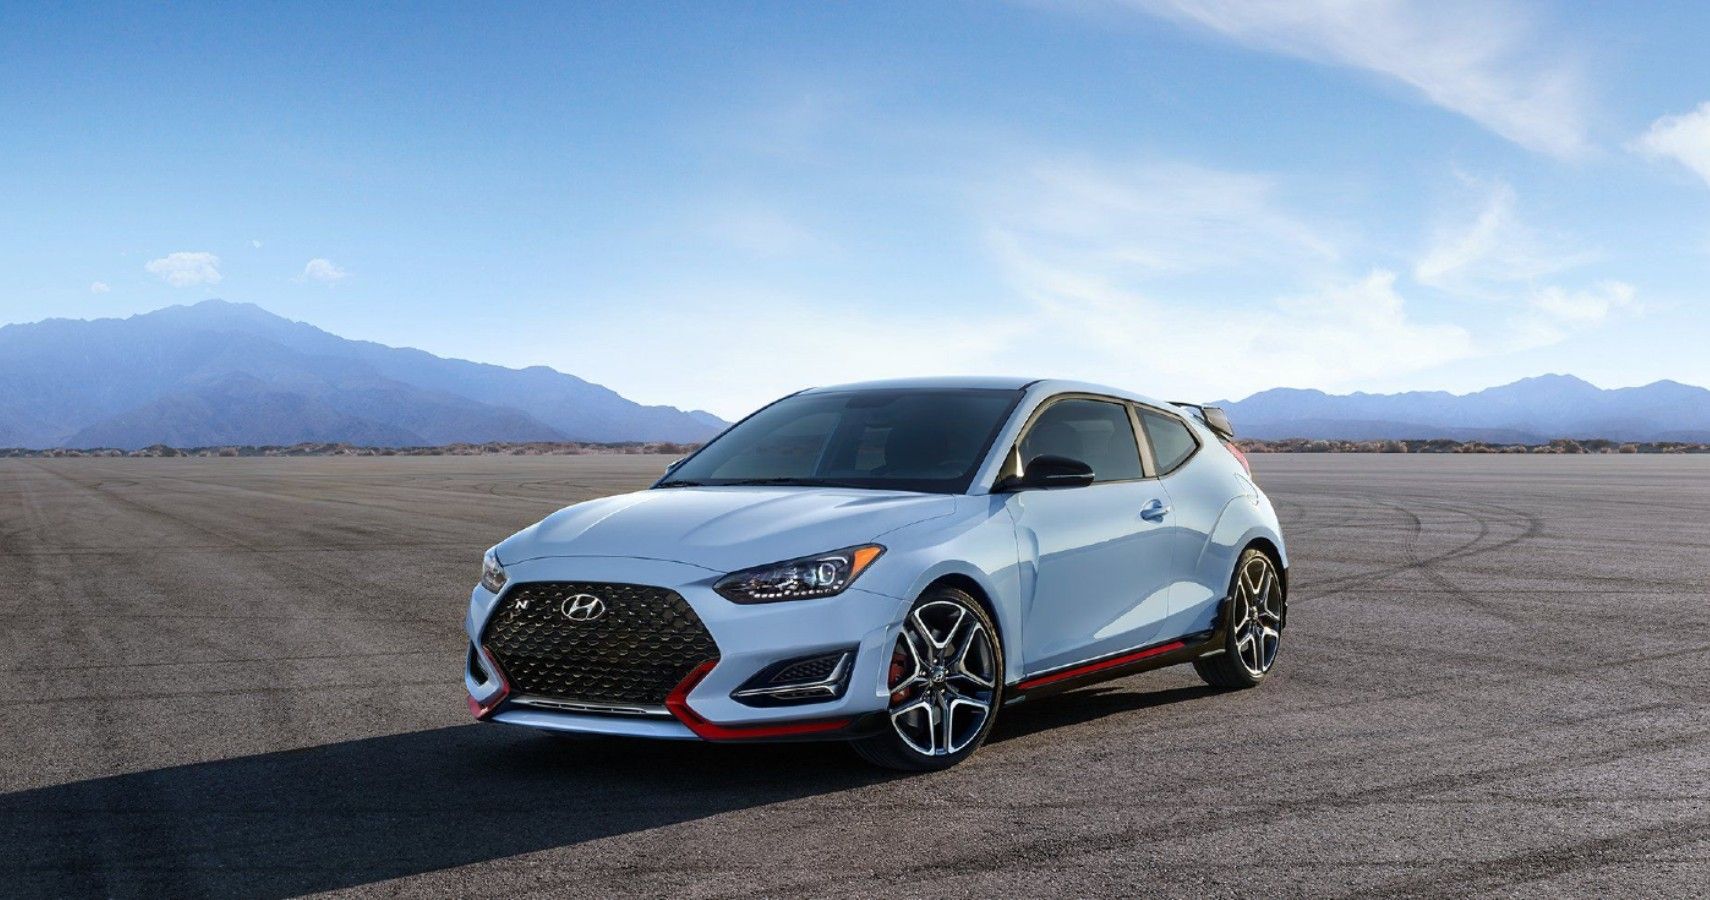 Why The 2022 Hyundai Veloster N Is One Of The Best Subcompact ...